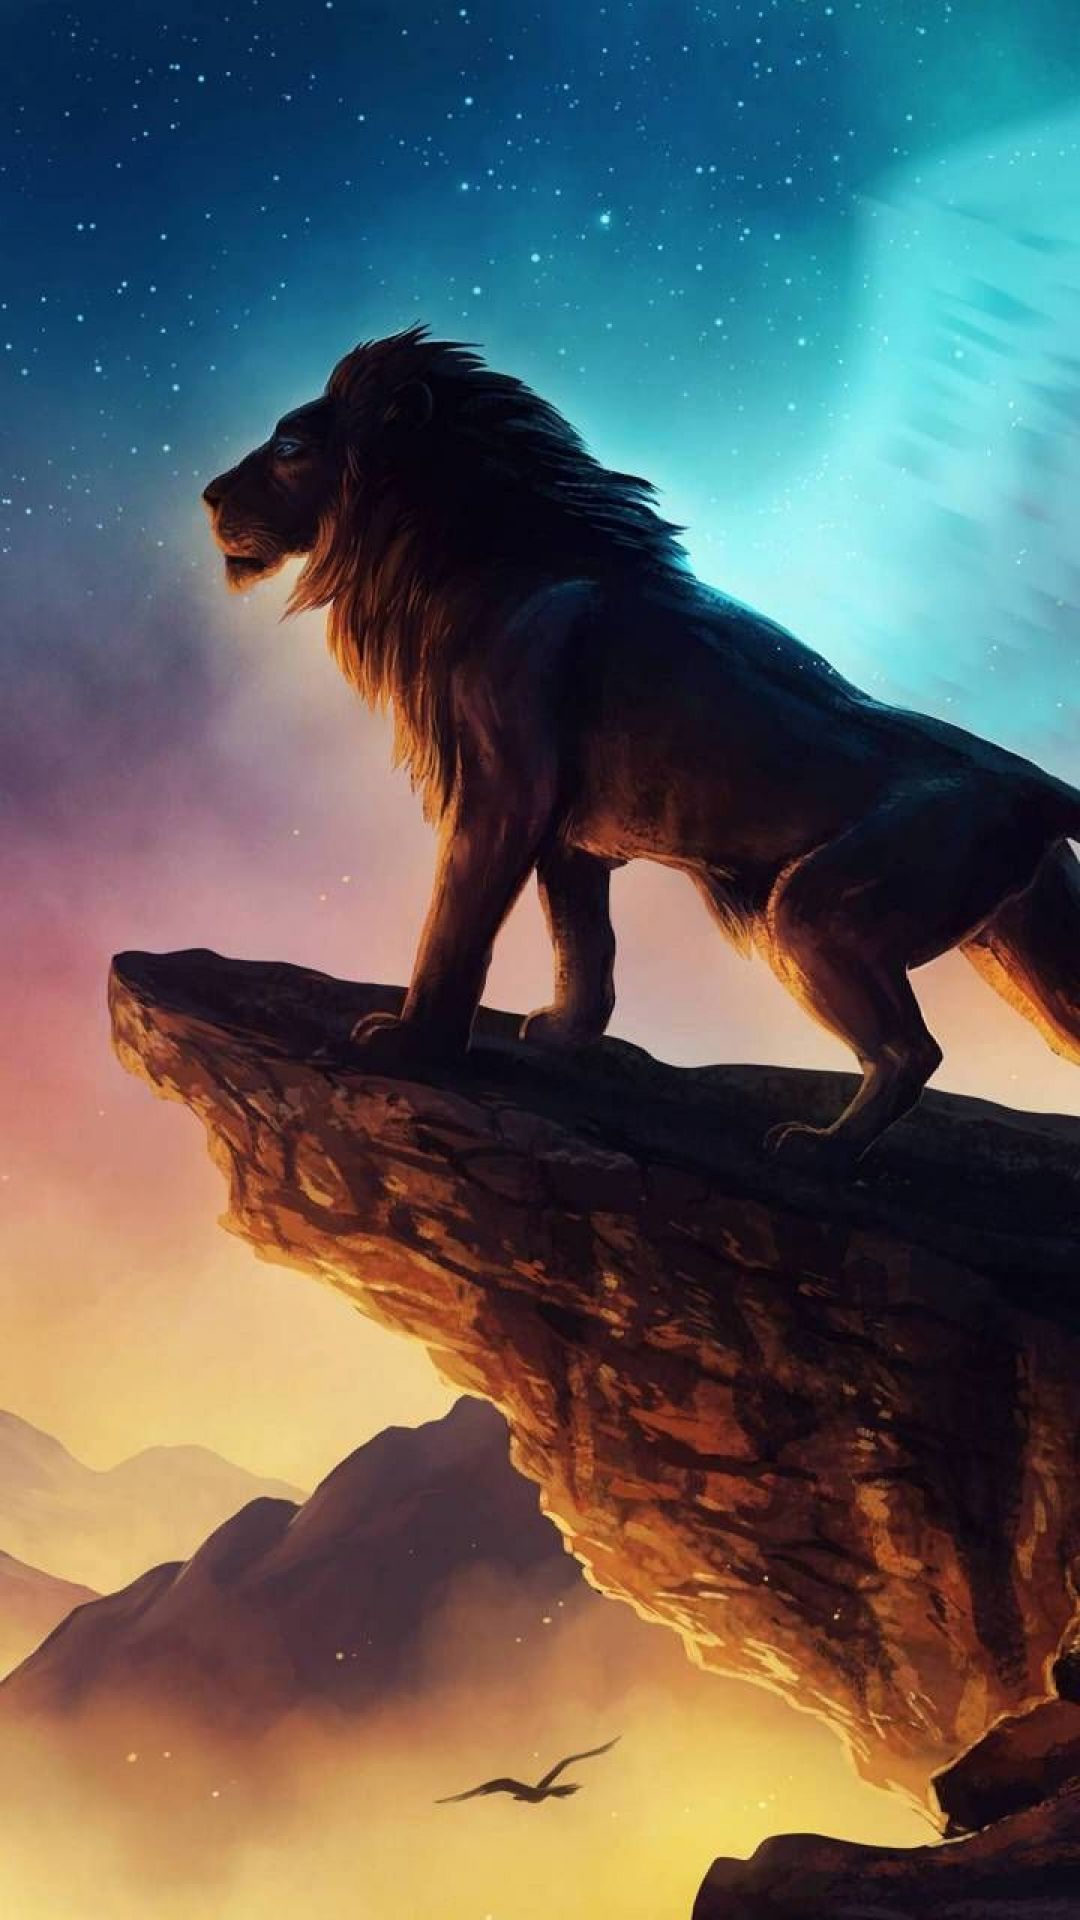 ✓[70+] Lion king. iPhone Wallpaper in 2019. Disney lion king - Android /  iPhone HD Wallpaper Background Download (png / jpg) (2023)